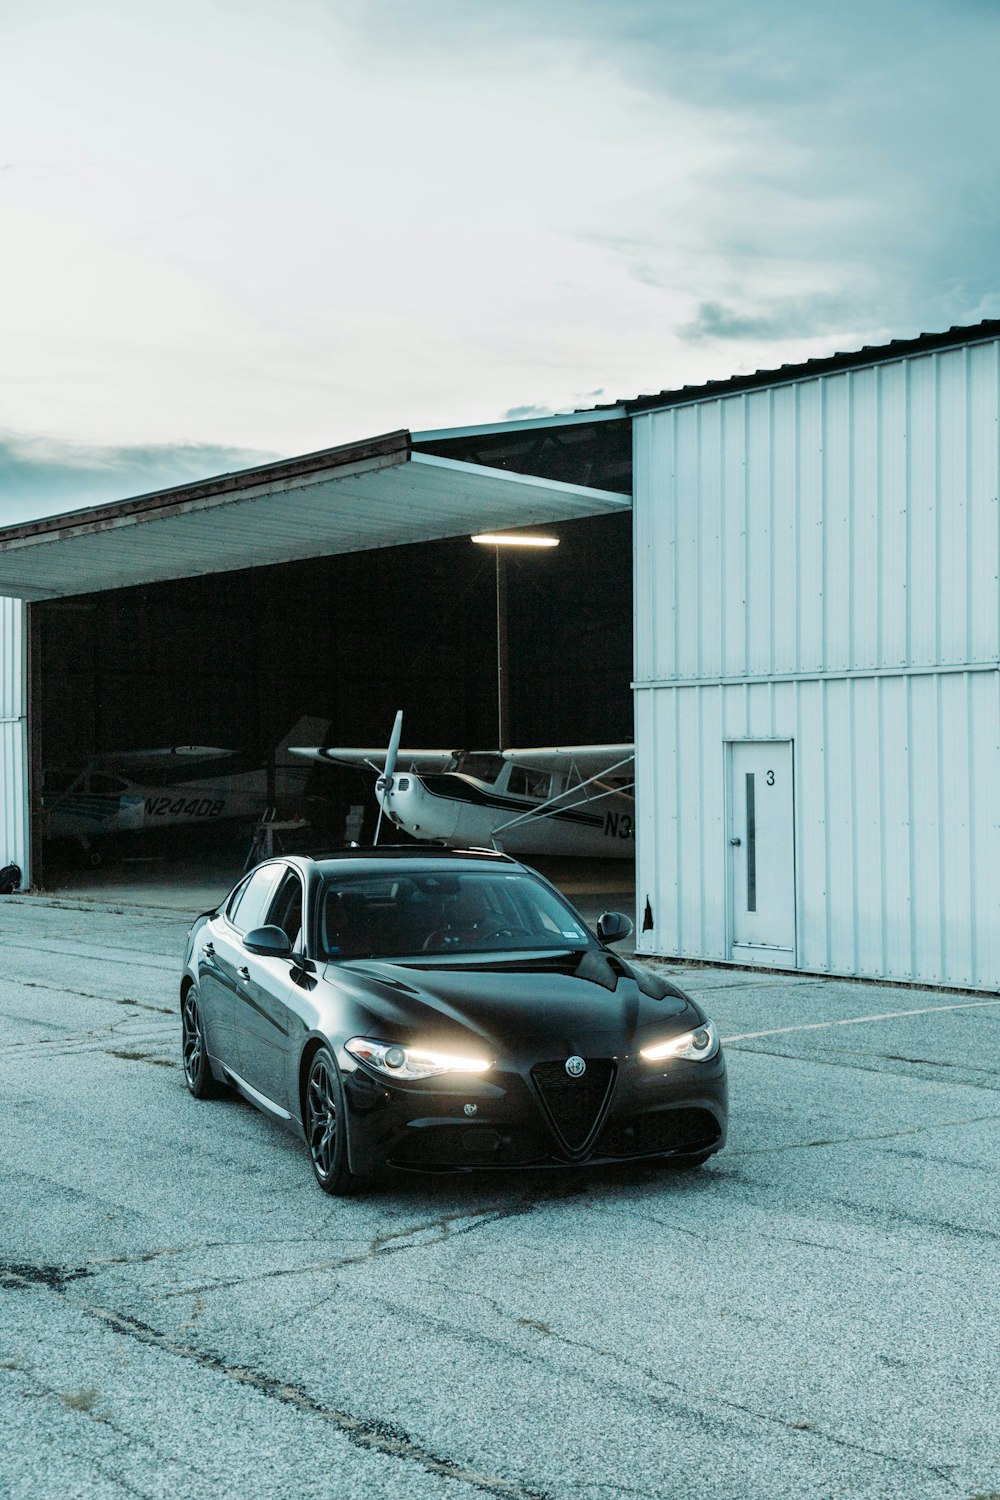 a black car parked in front of a hangar